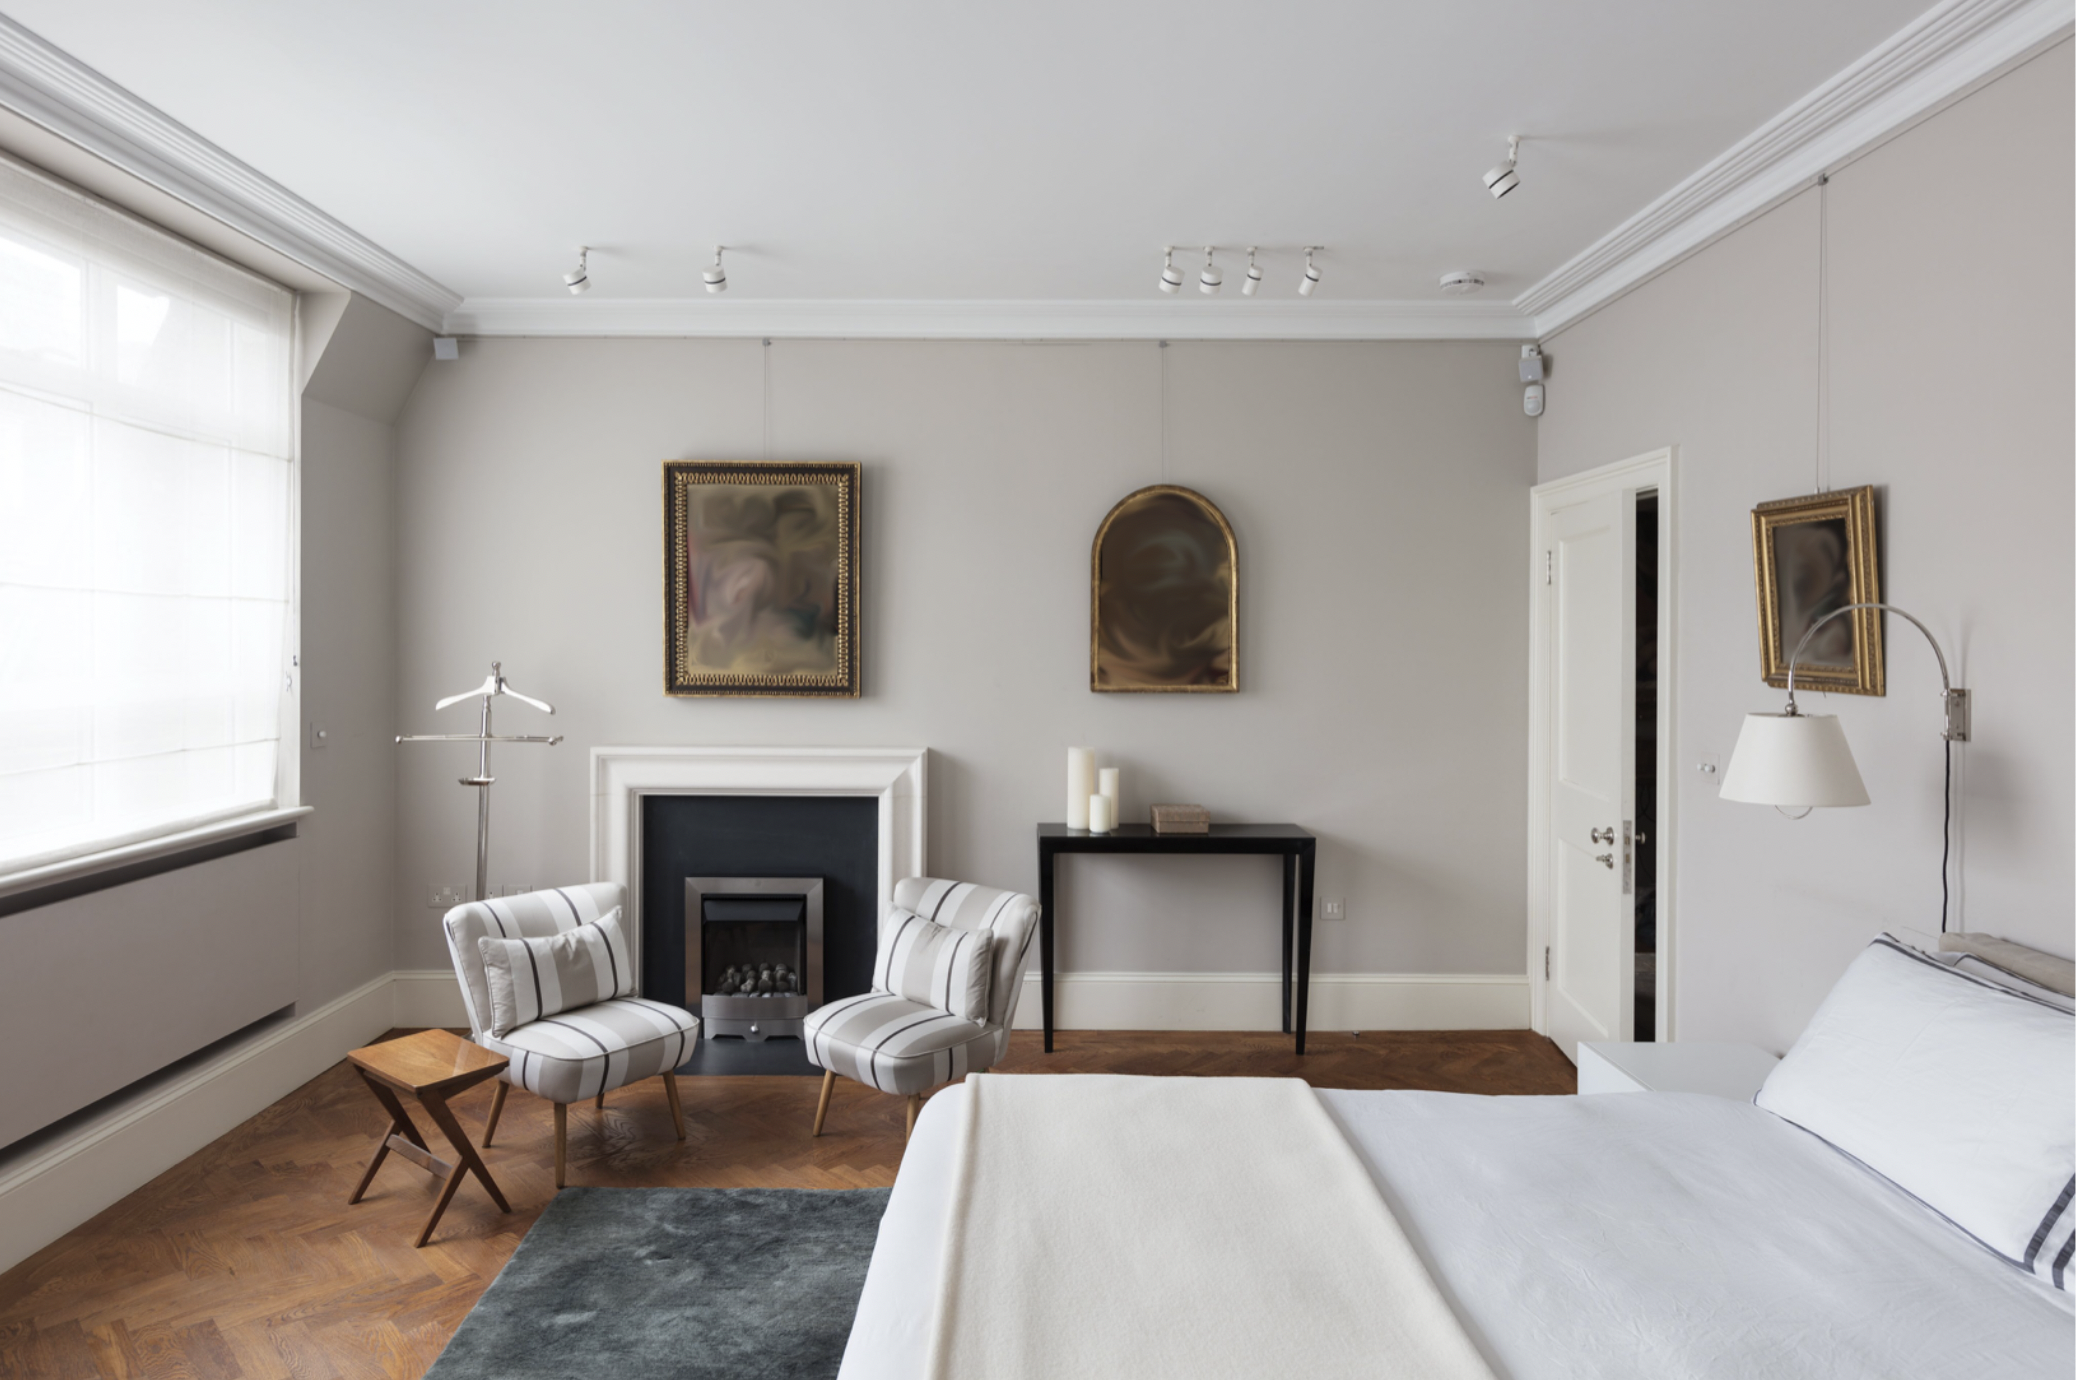   Ryder Street   Crawford and Gray Architects / Galata Studio designed, detailed and follow the works for the full refurbishment of this apartment in Saint James's focused onto two main spaces: a living and entertainment space at one end of the apart